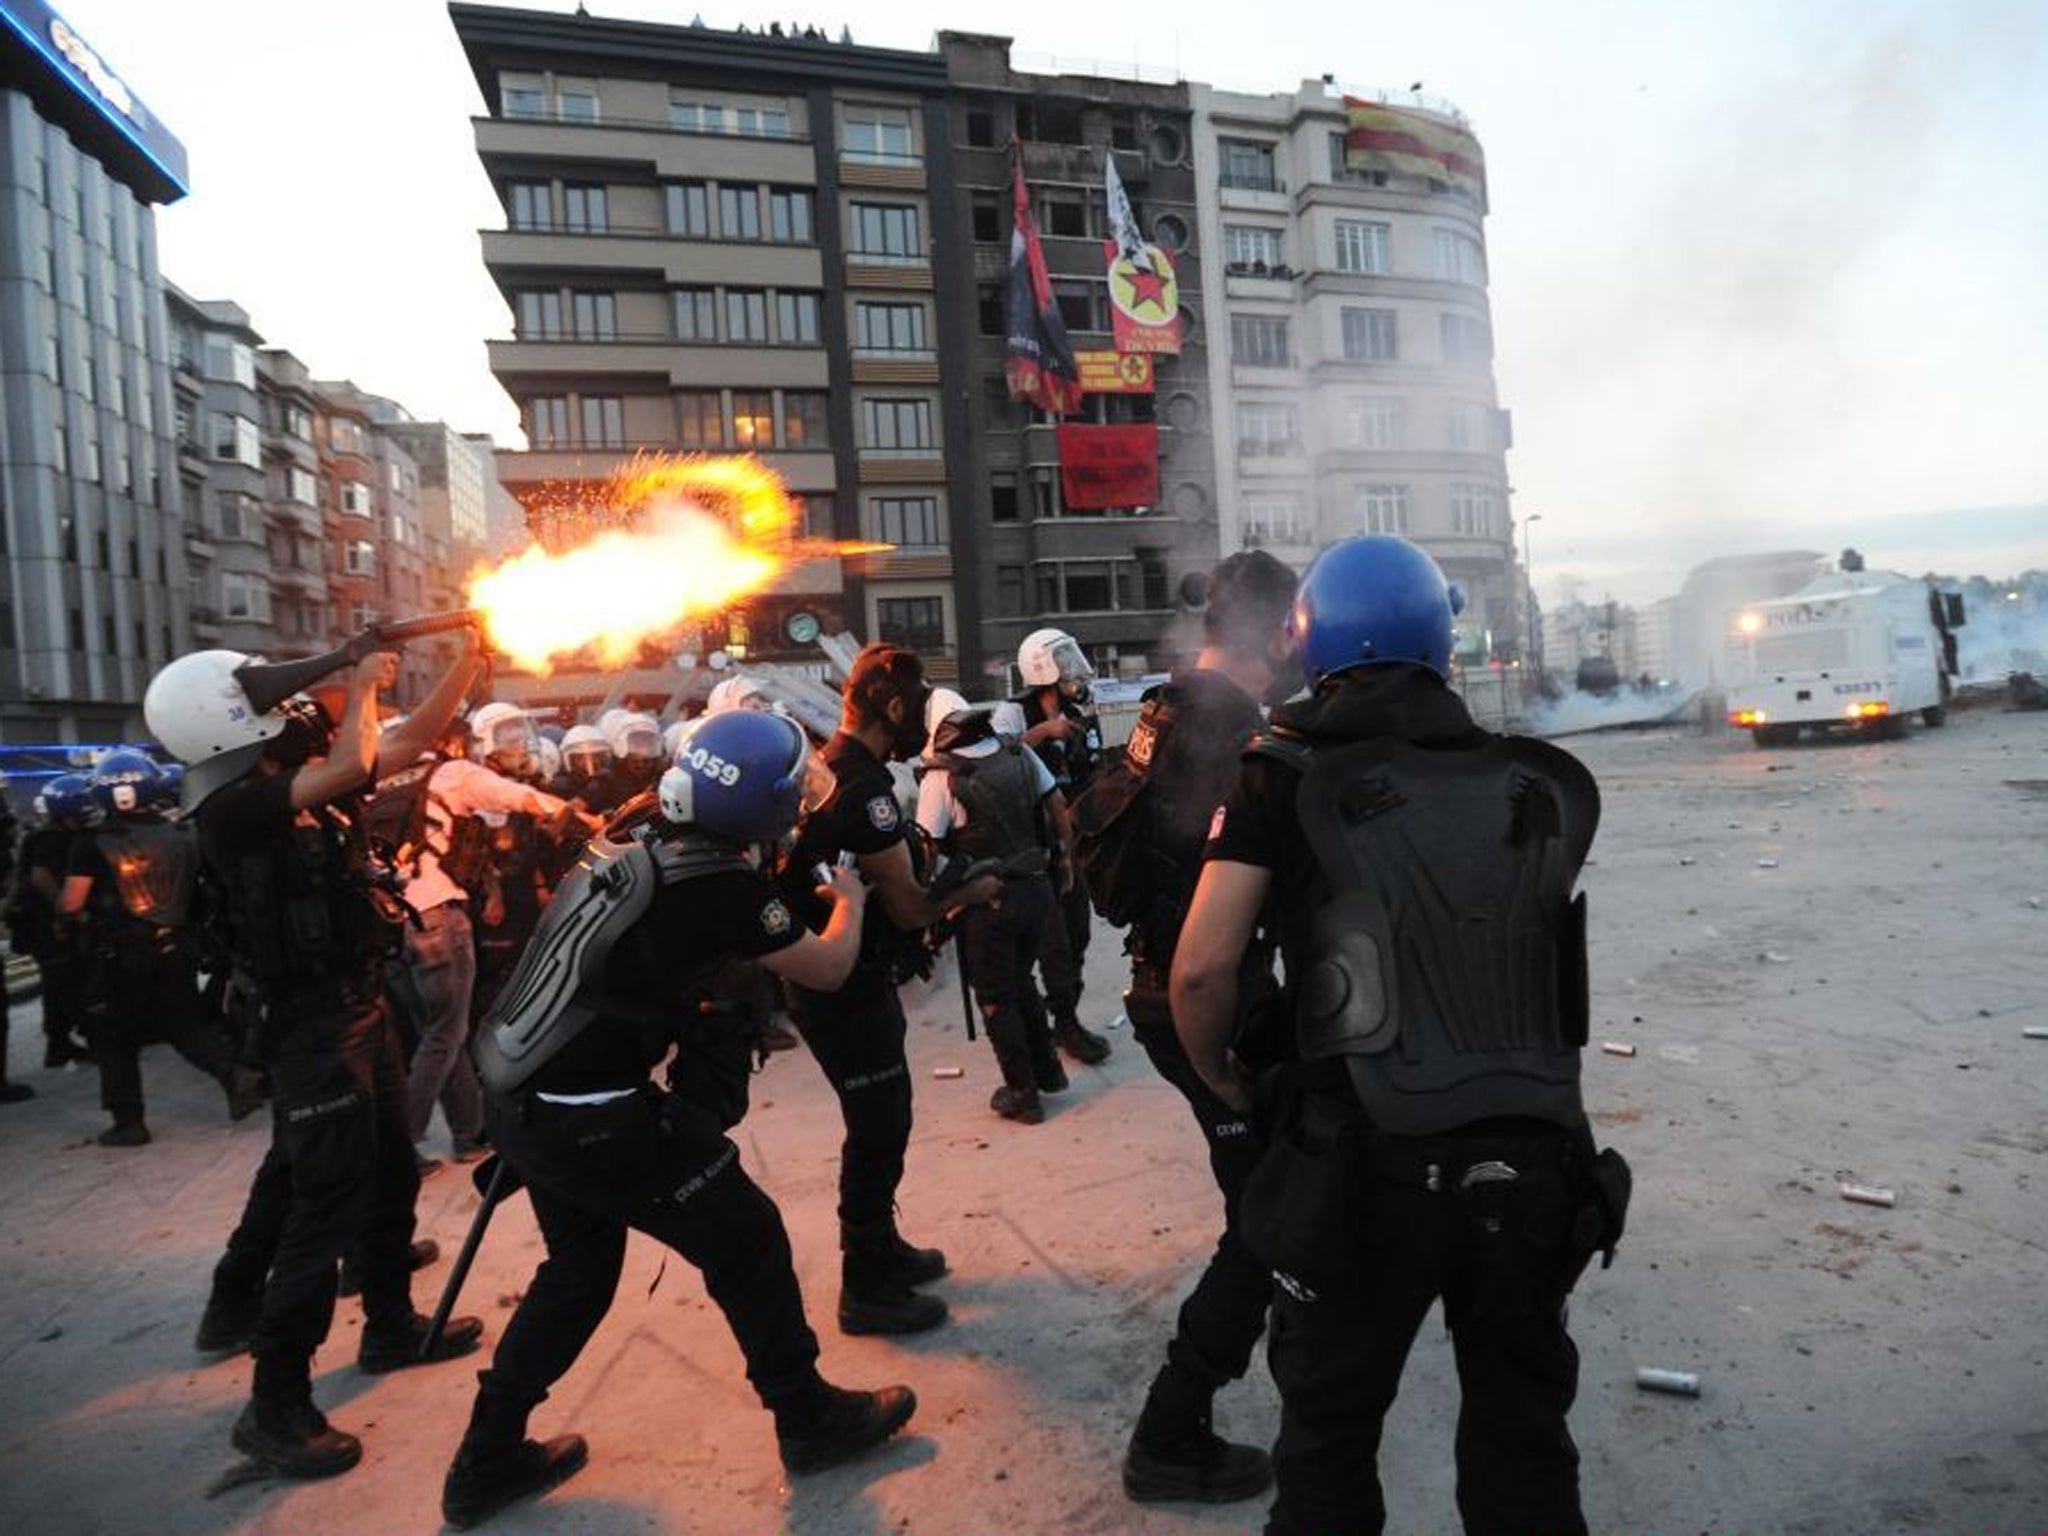 Turkish police fire tear gas at anti-government protesters as they try to reestablish police control of Taksim Square